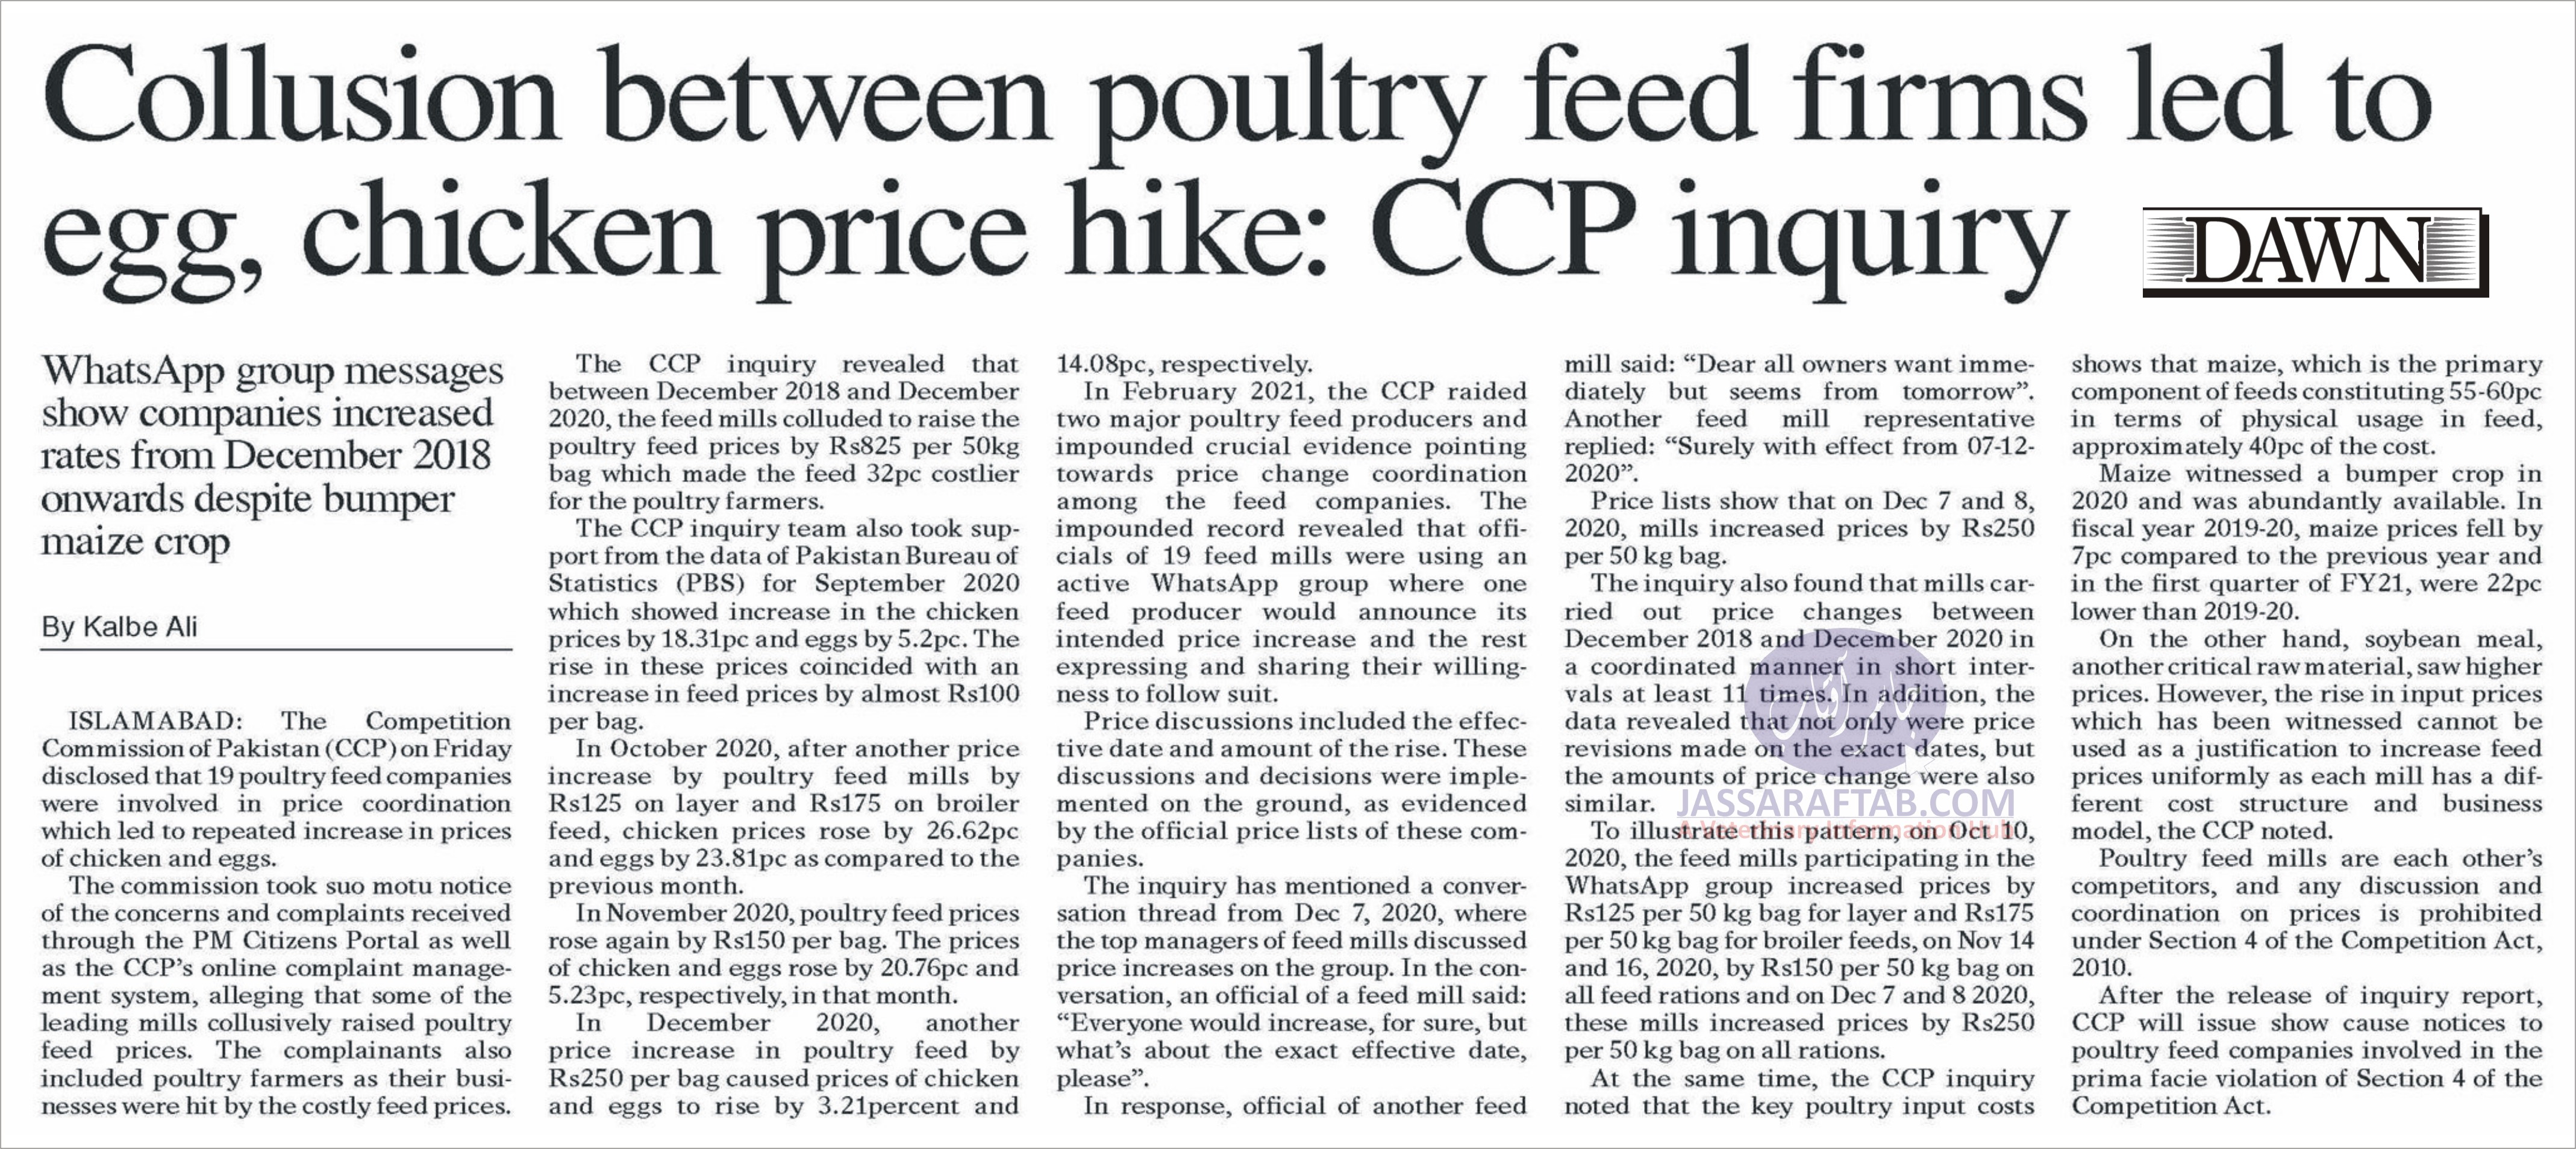 Collusion between feed firms led to poultry products price hike. Poultry Industry Inquiry by Competition Commission of Pakistan 